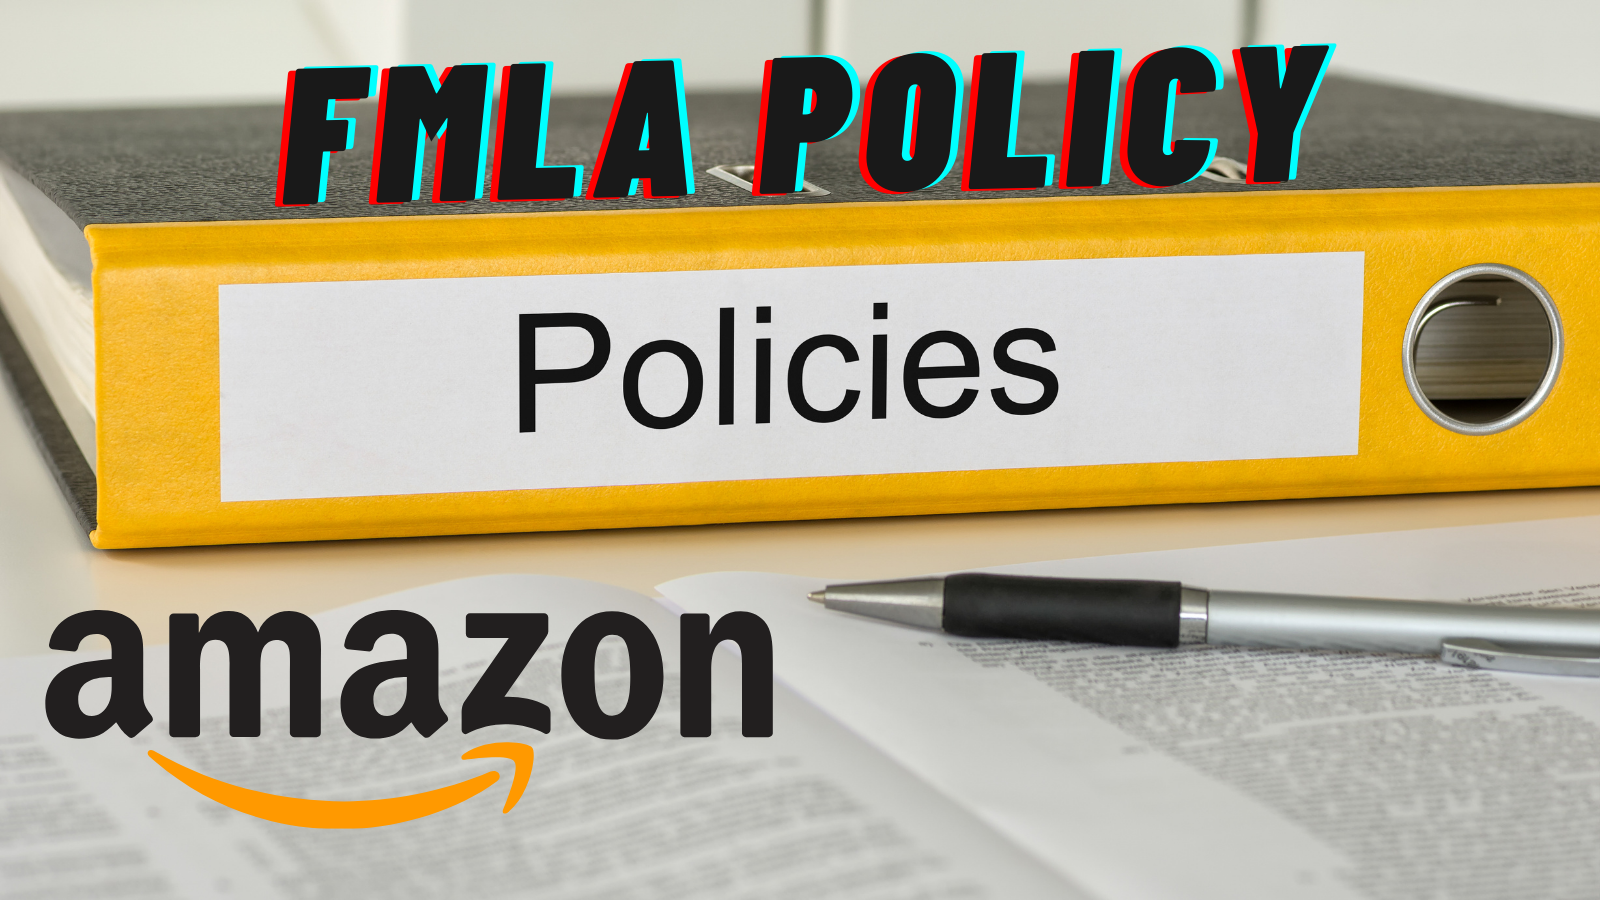 A Complete Guide to Amazon FMLA Policy